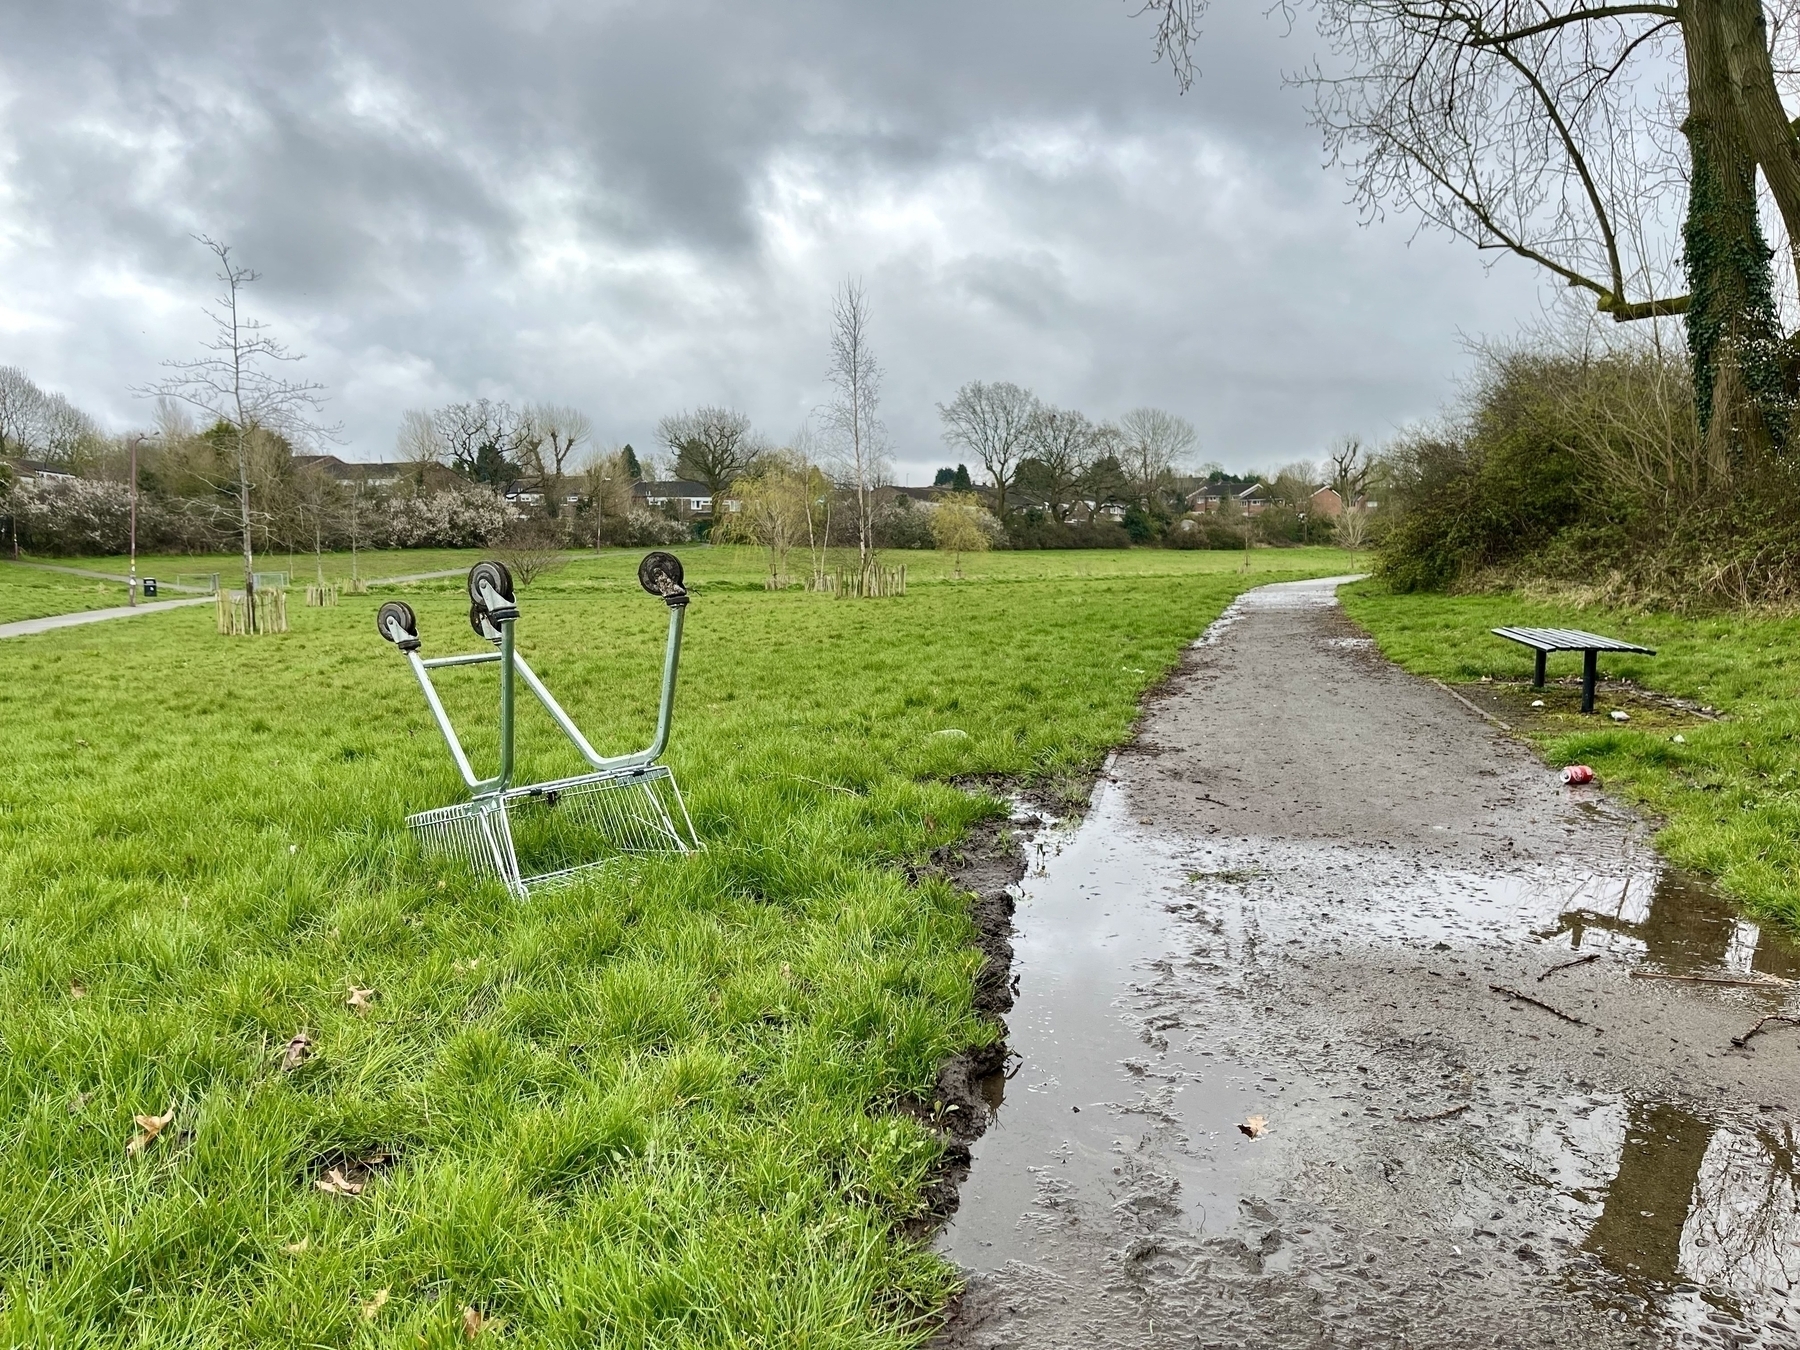 An upside down shopping trolley (cart) sitting on a grassy area in a park, next to a muddy path. Dismal grey clouds overhead. 